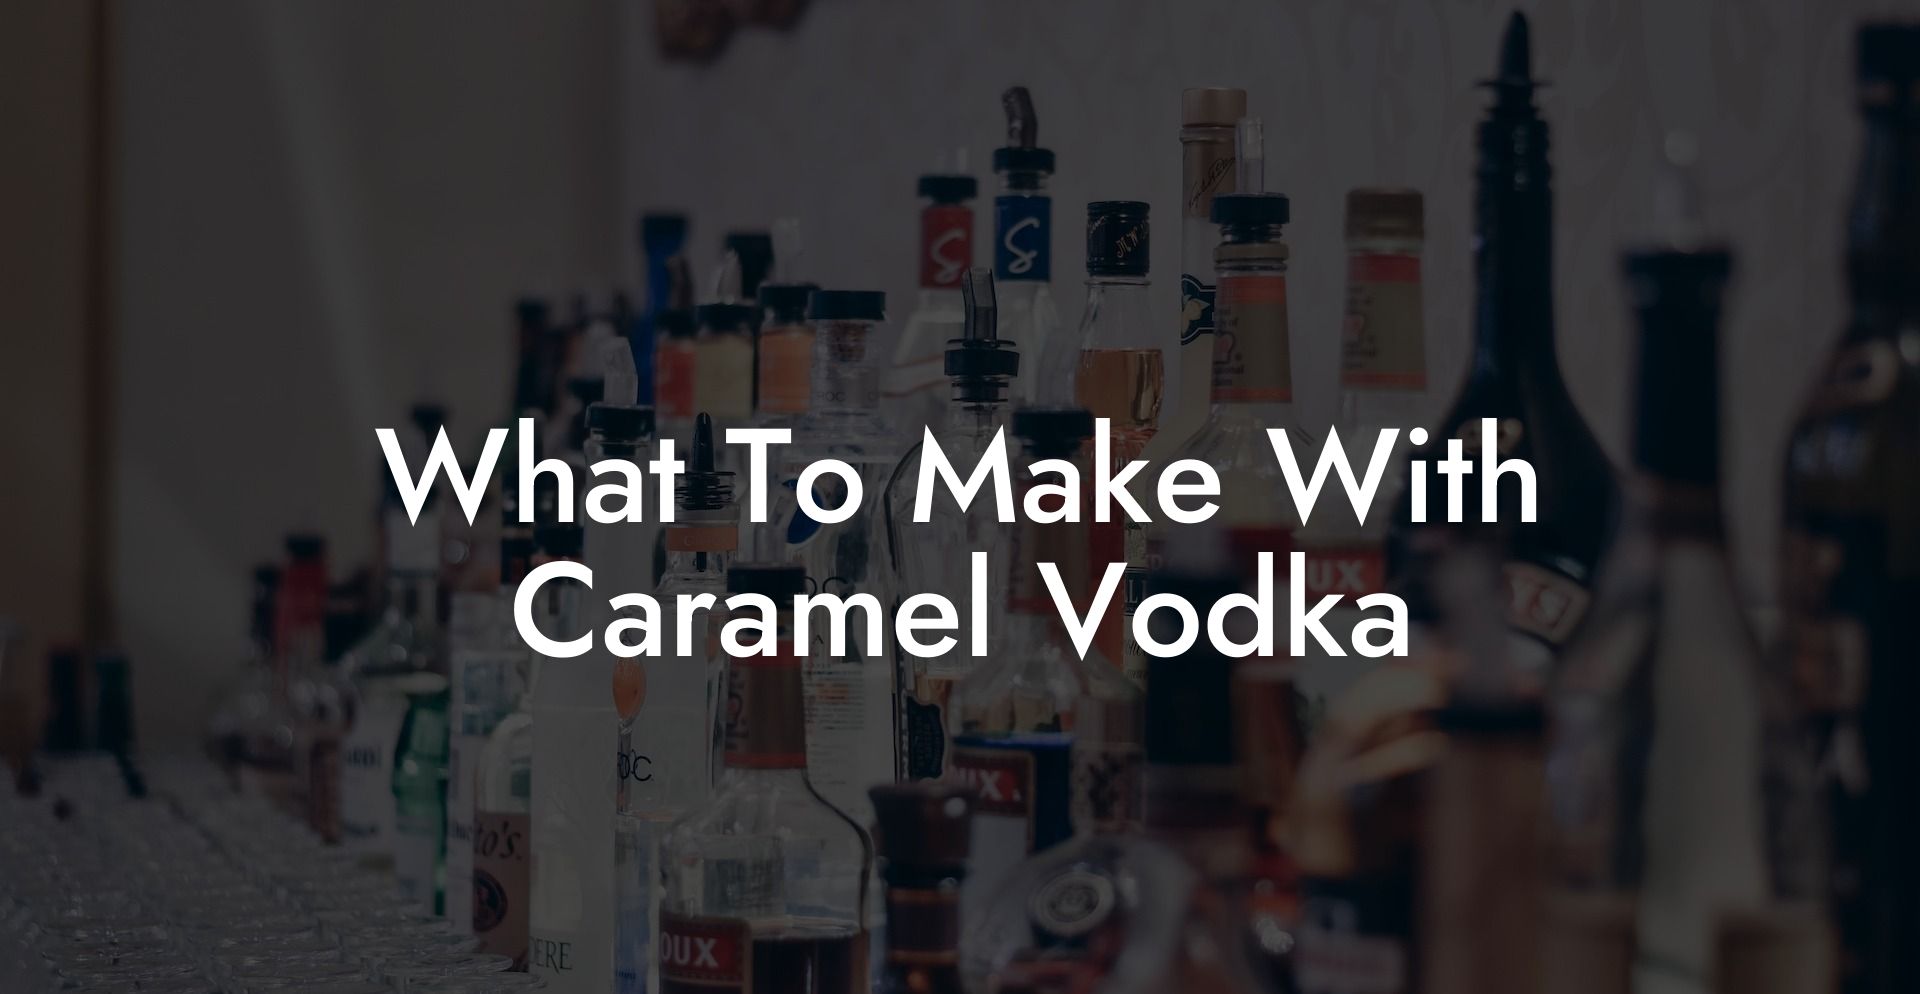 What To Make With Caramel Vodka